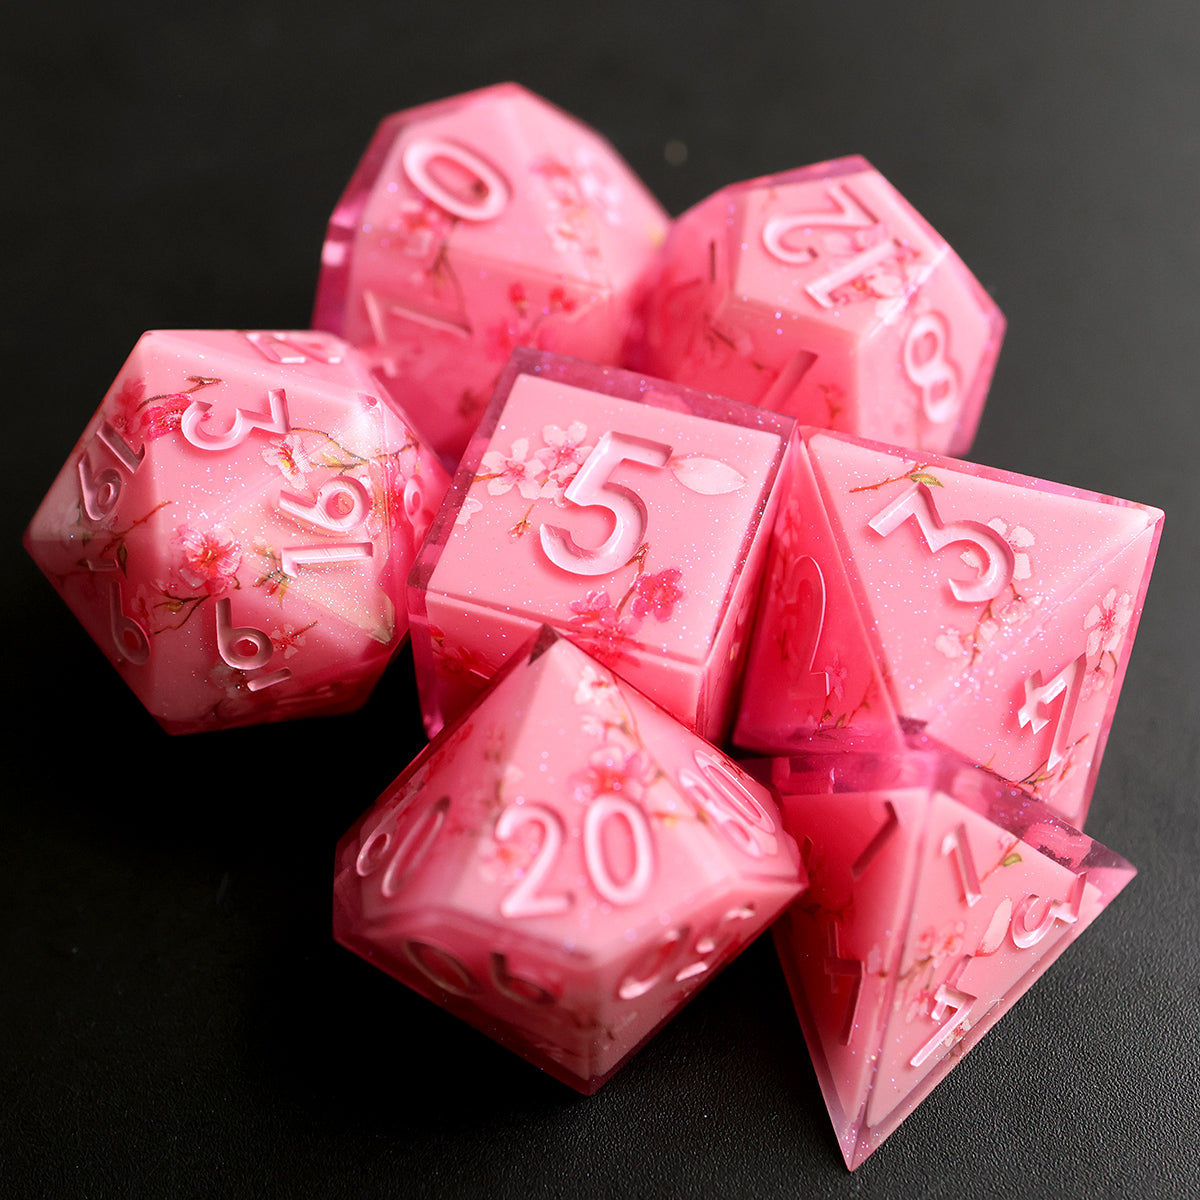 Sukura framed blossom DND dice set, for TTRPG role playing games and dice goblin, dice dragon collectors, available from a UK dice store